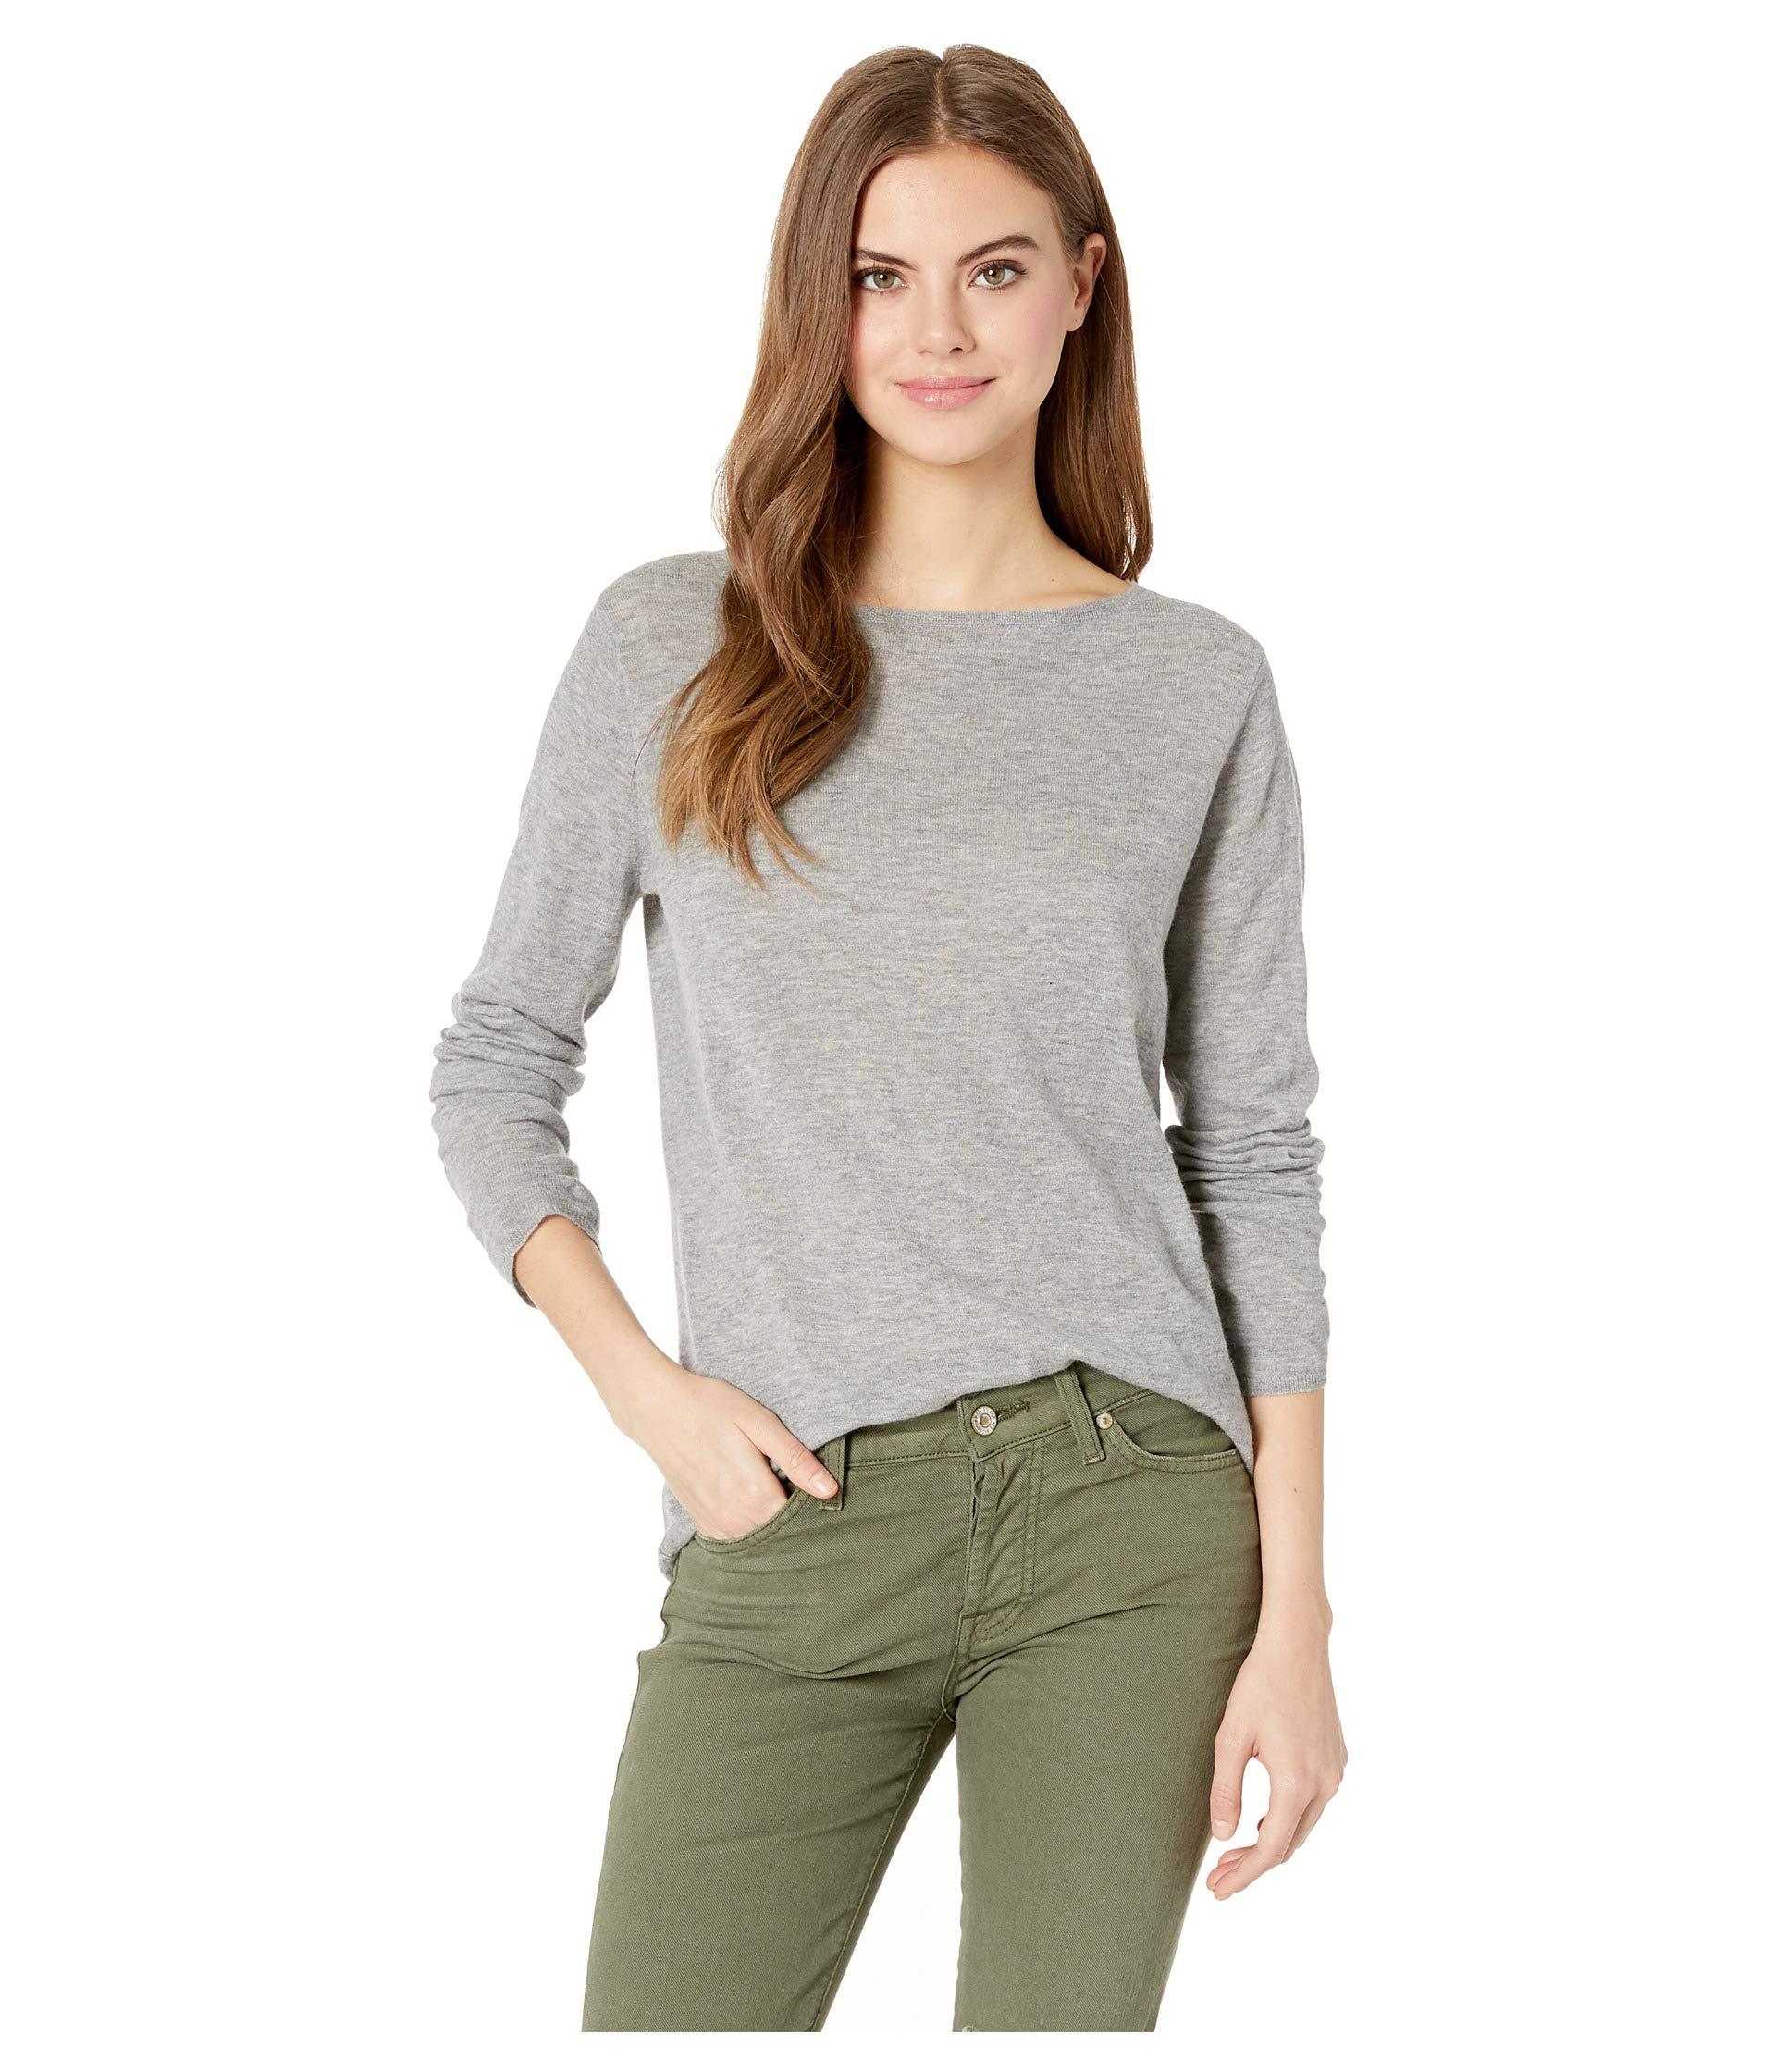 Majestic Filatures Cashmere Long Sleeve Crew Neck Sweater in Gray - Lyst